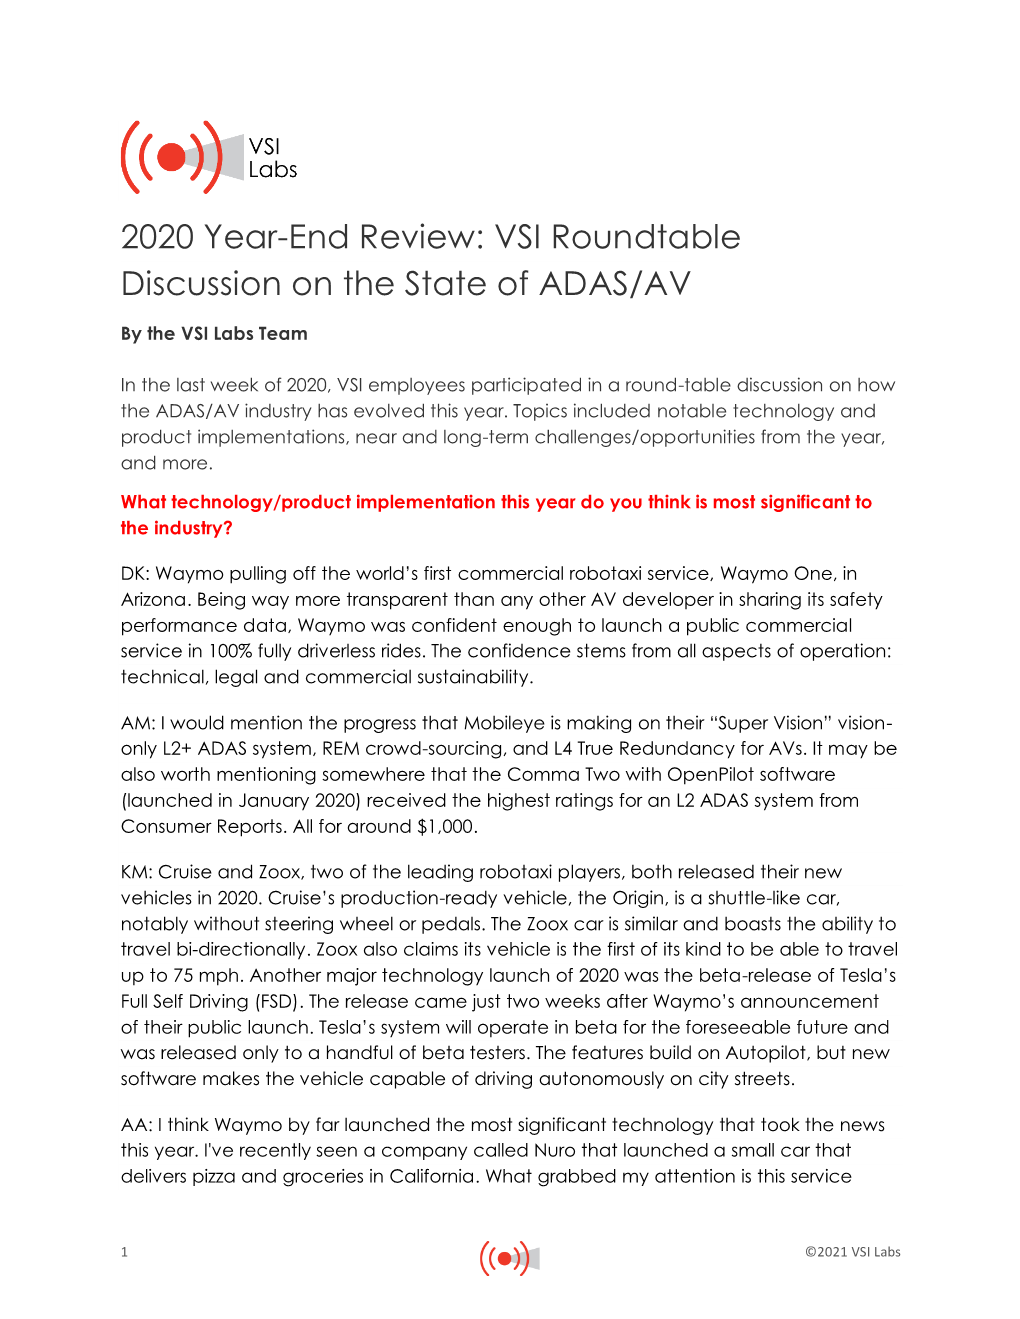 2020 Year-End Review: VSI Roundtable Discussion on the State of ADAS/AV